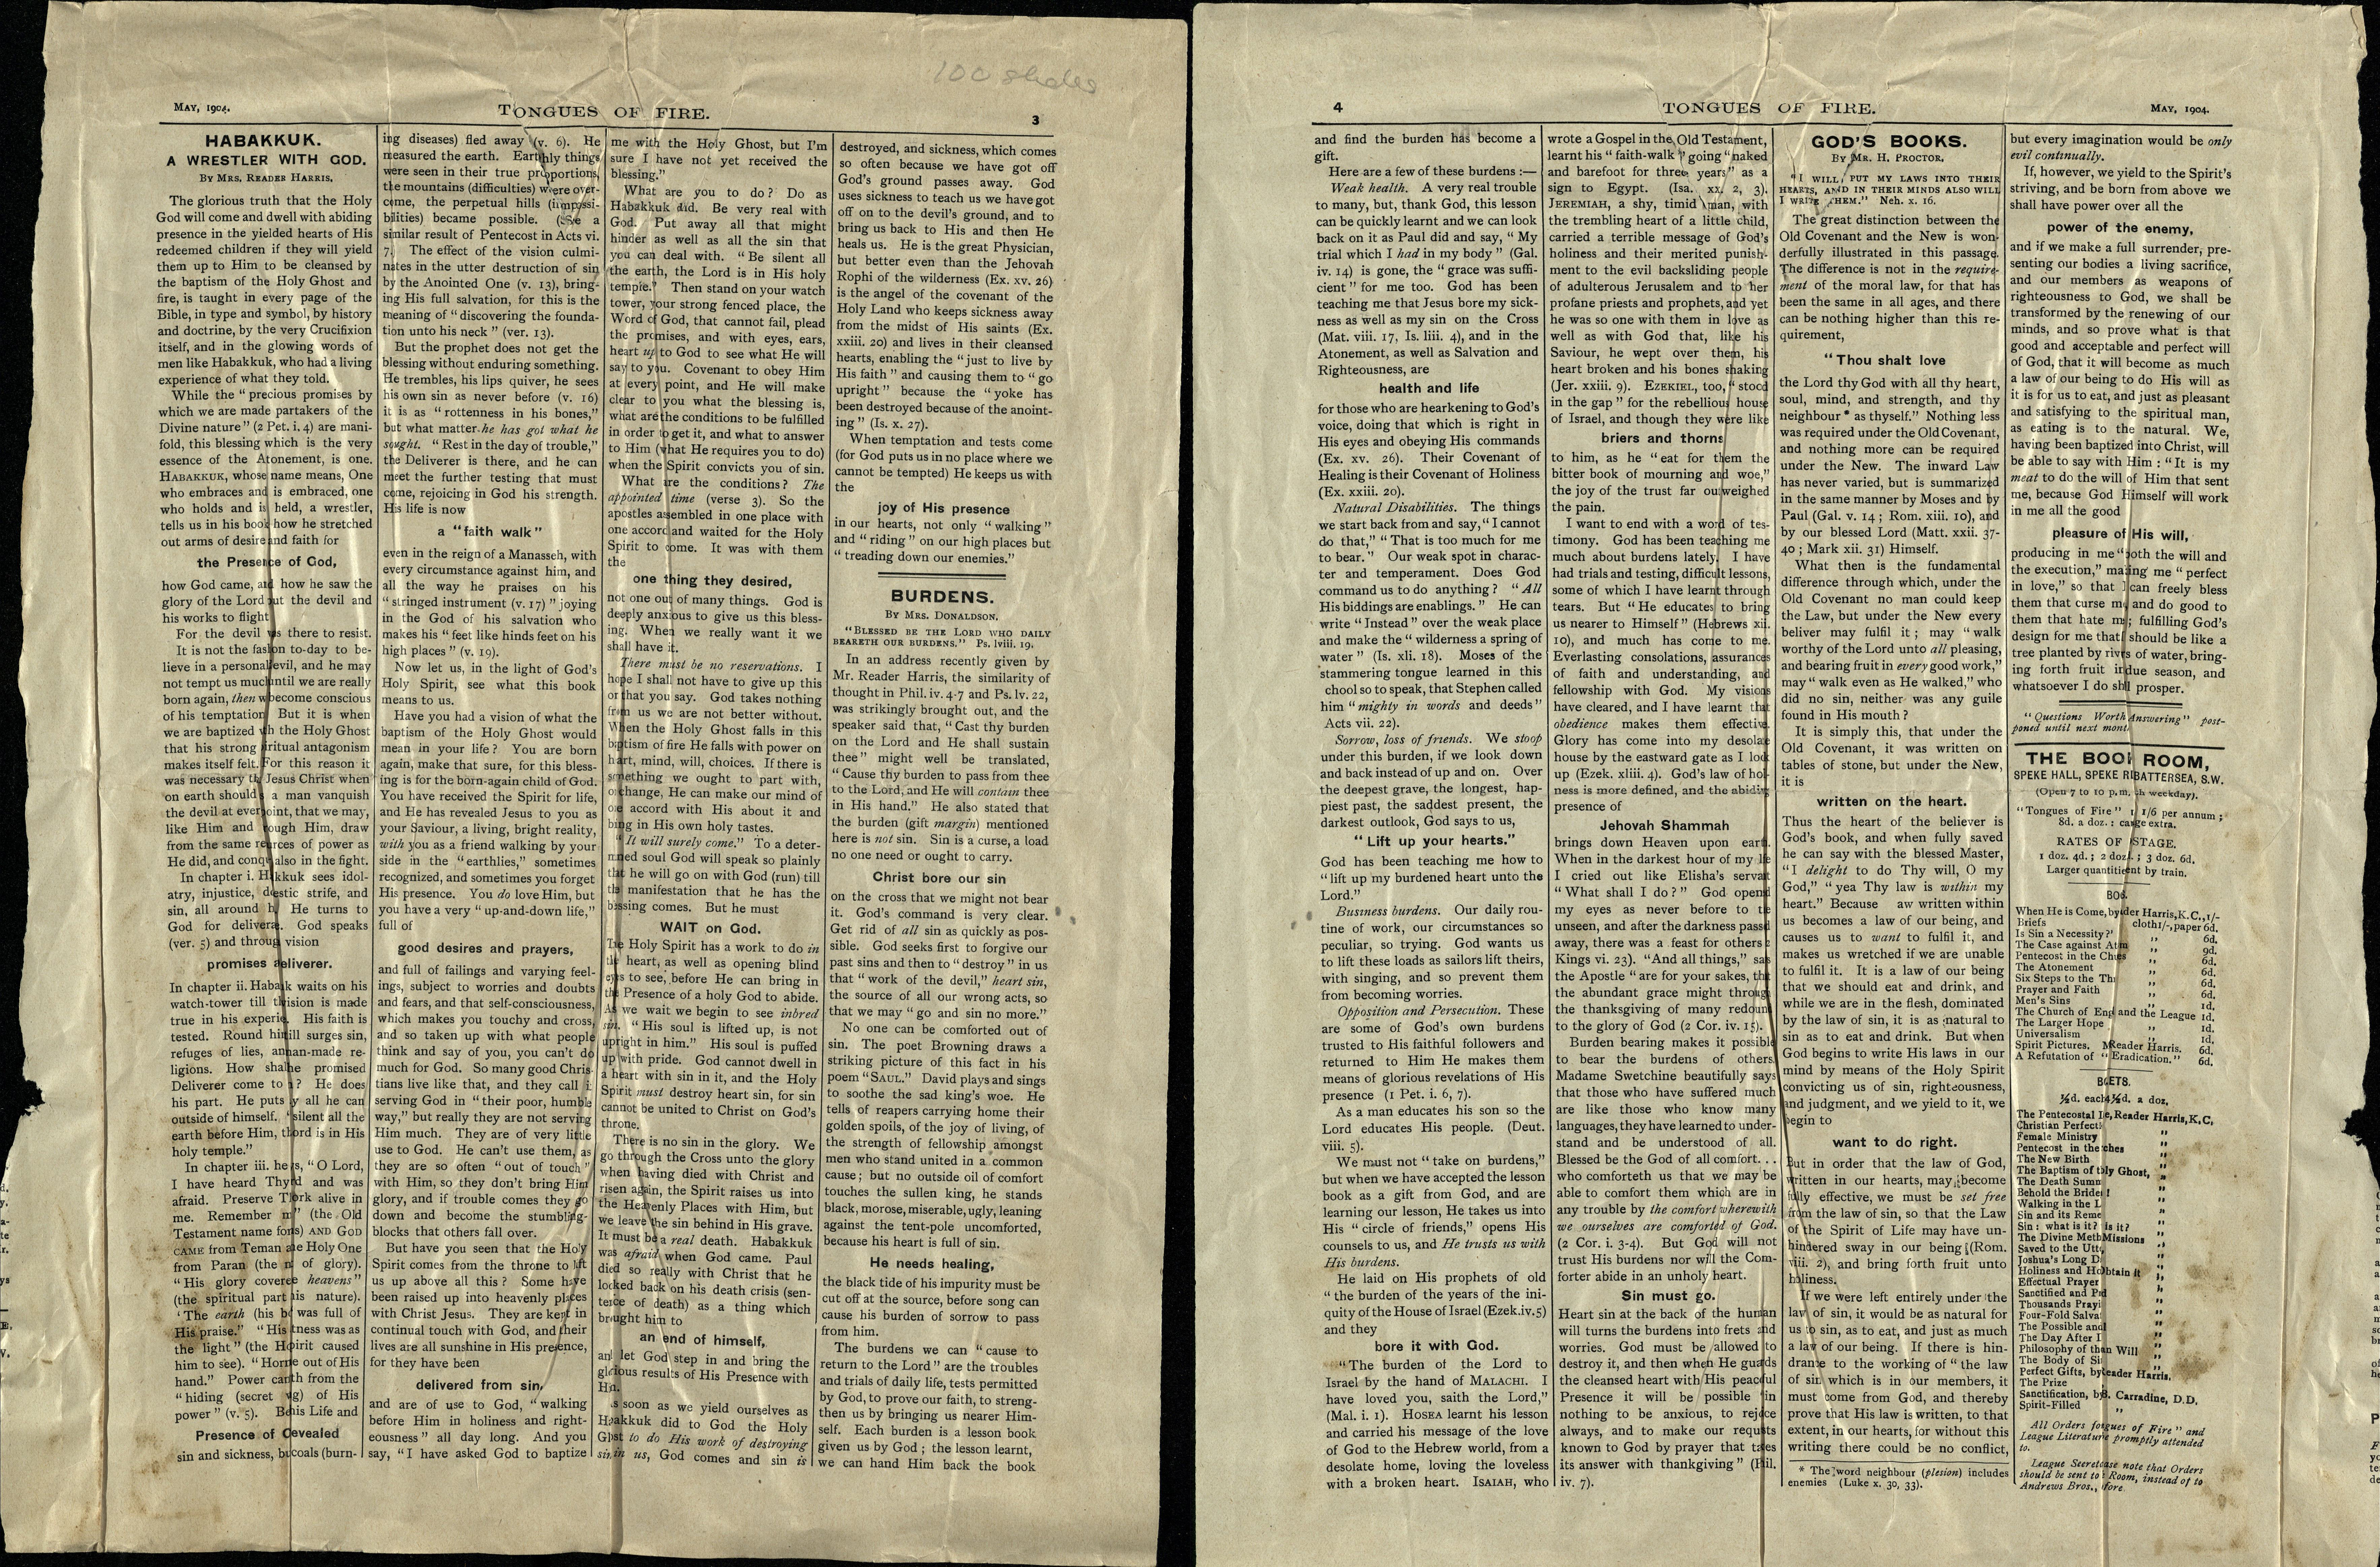 Pages 3 & 4 of a May 1904 issue of Tongues of Fire